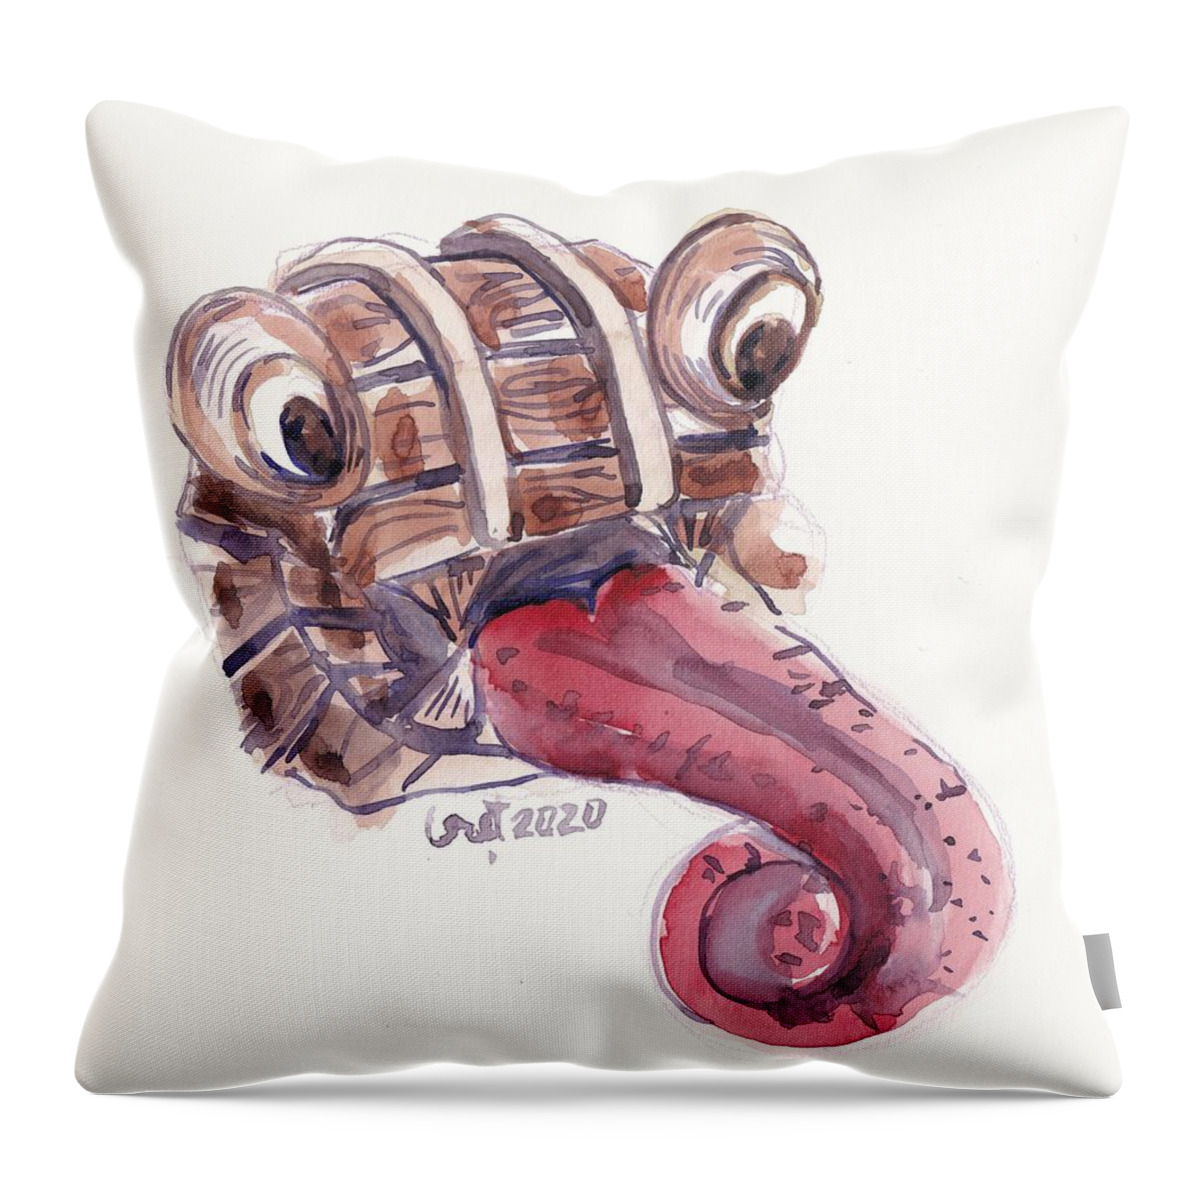 Miniature Throw Pillow featuring the painting Mimic by George Cret